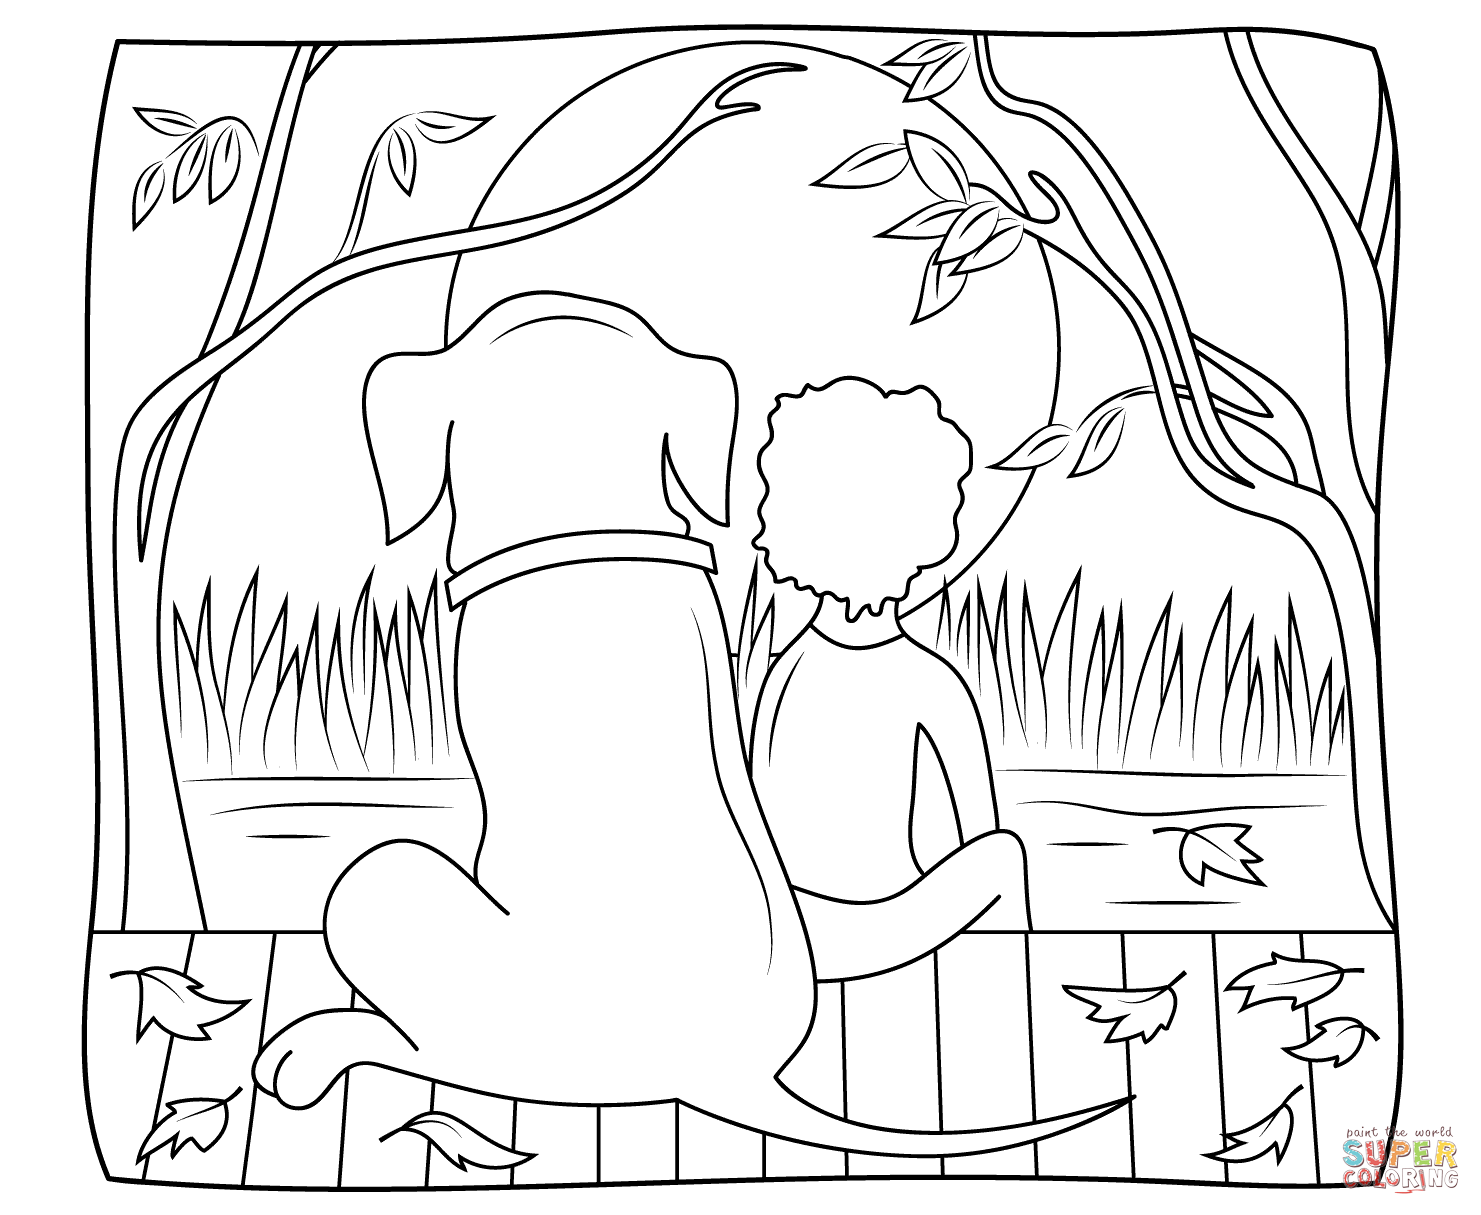 Thumbelina finds a shelter under the leaf coloring page | Free ...